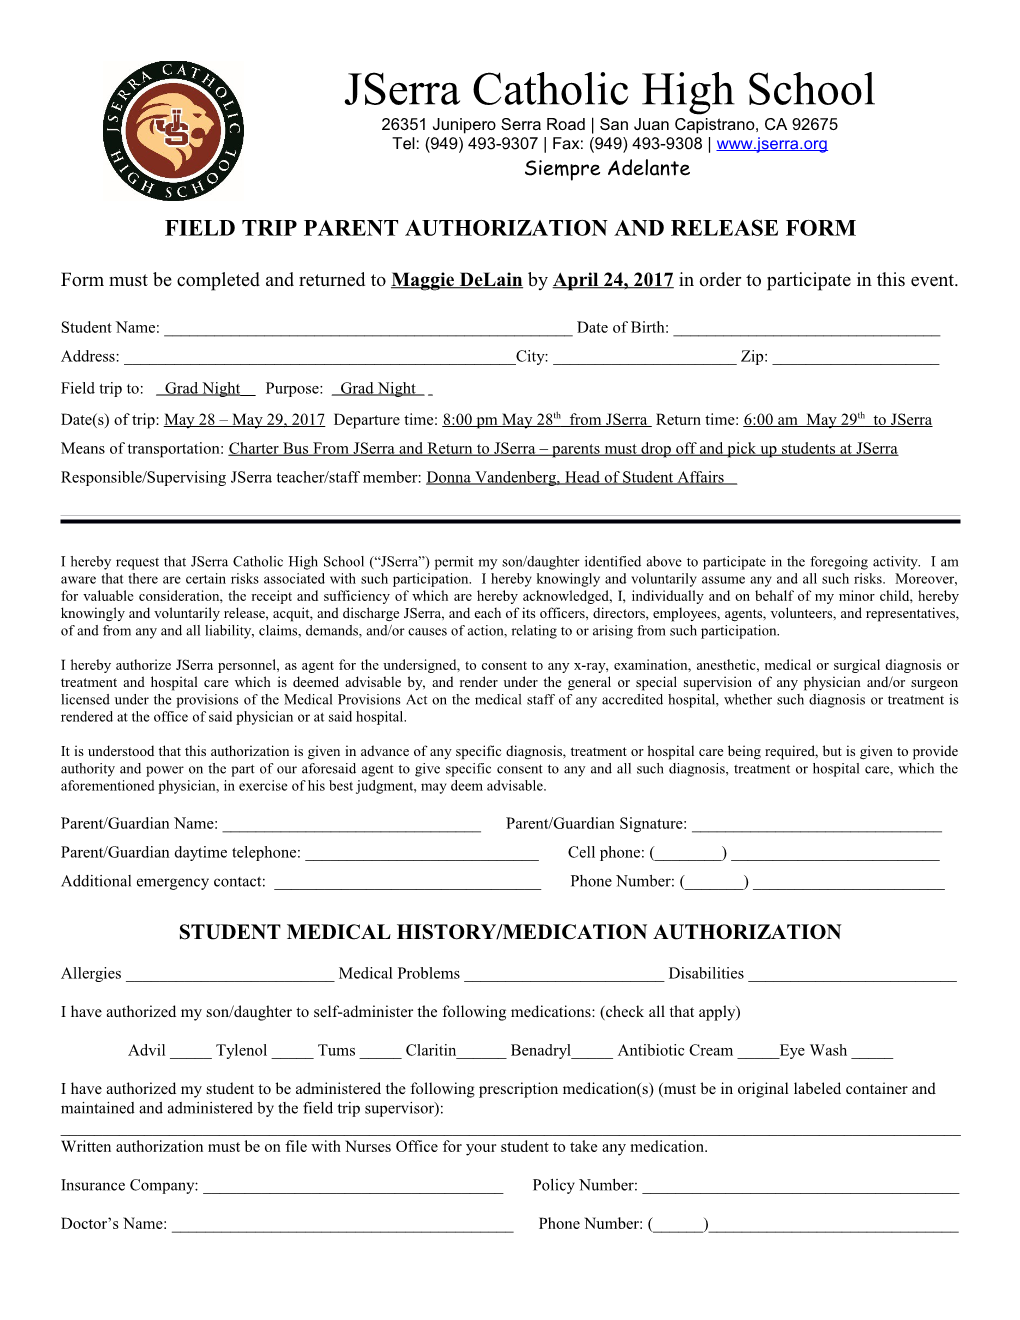 Field Trip Parent Authorization and Release Form